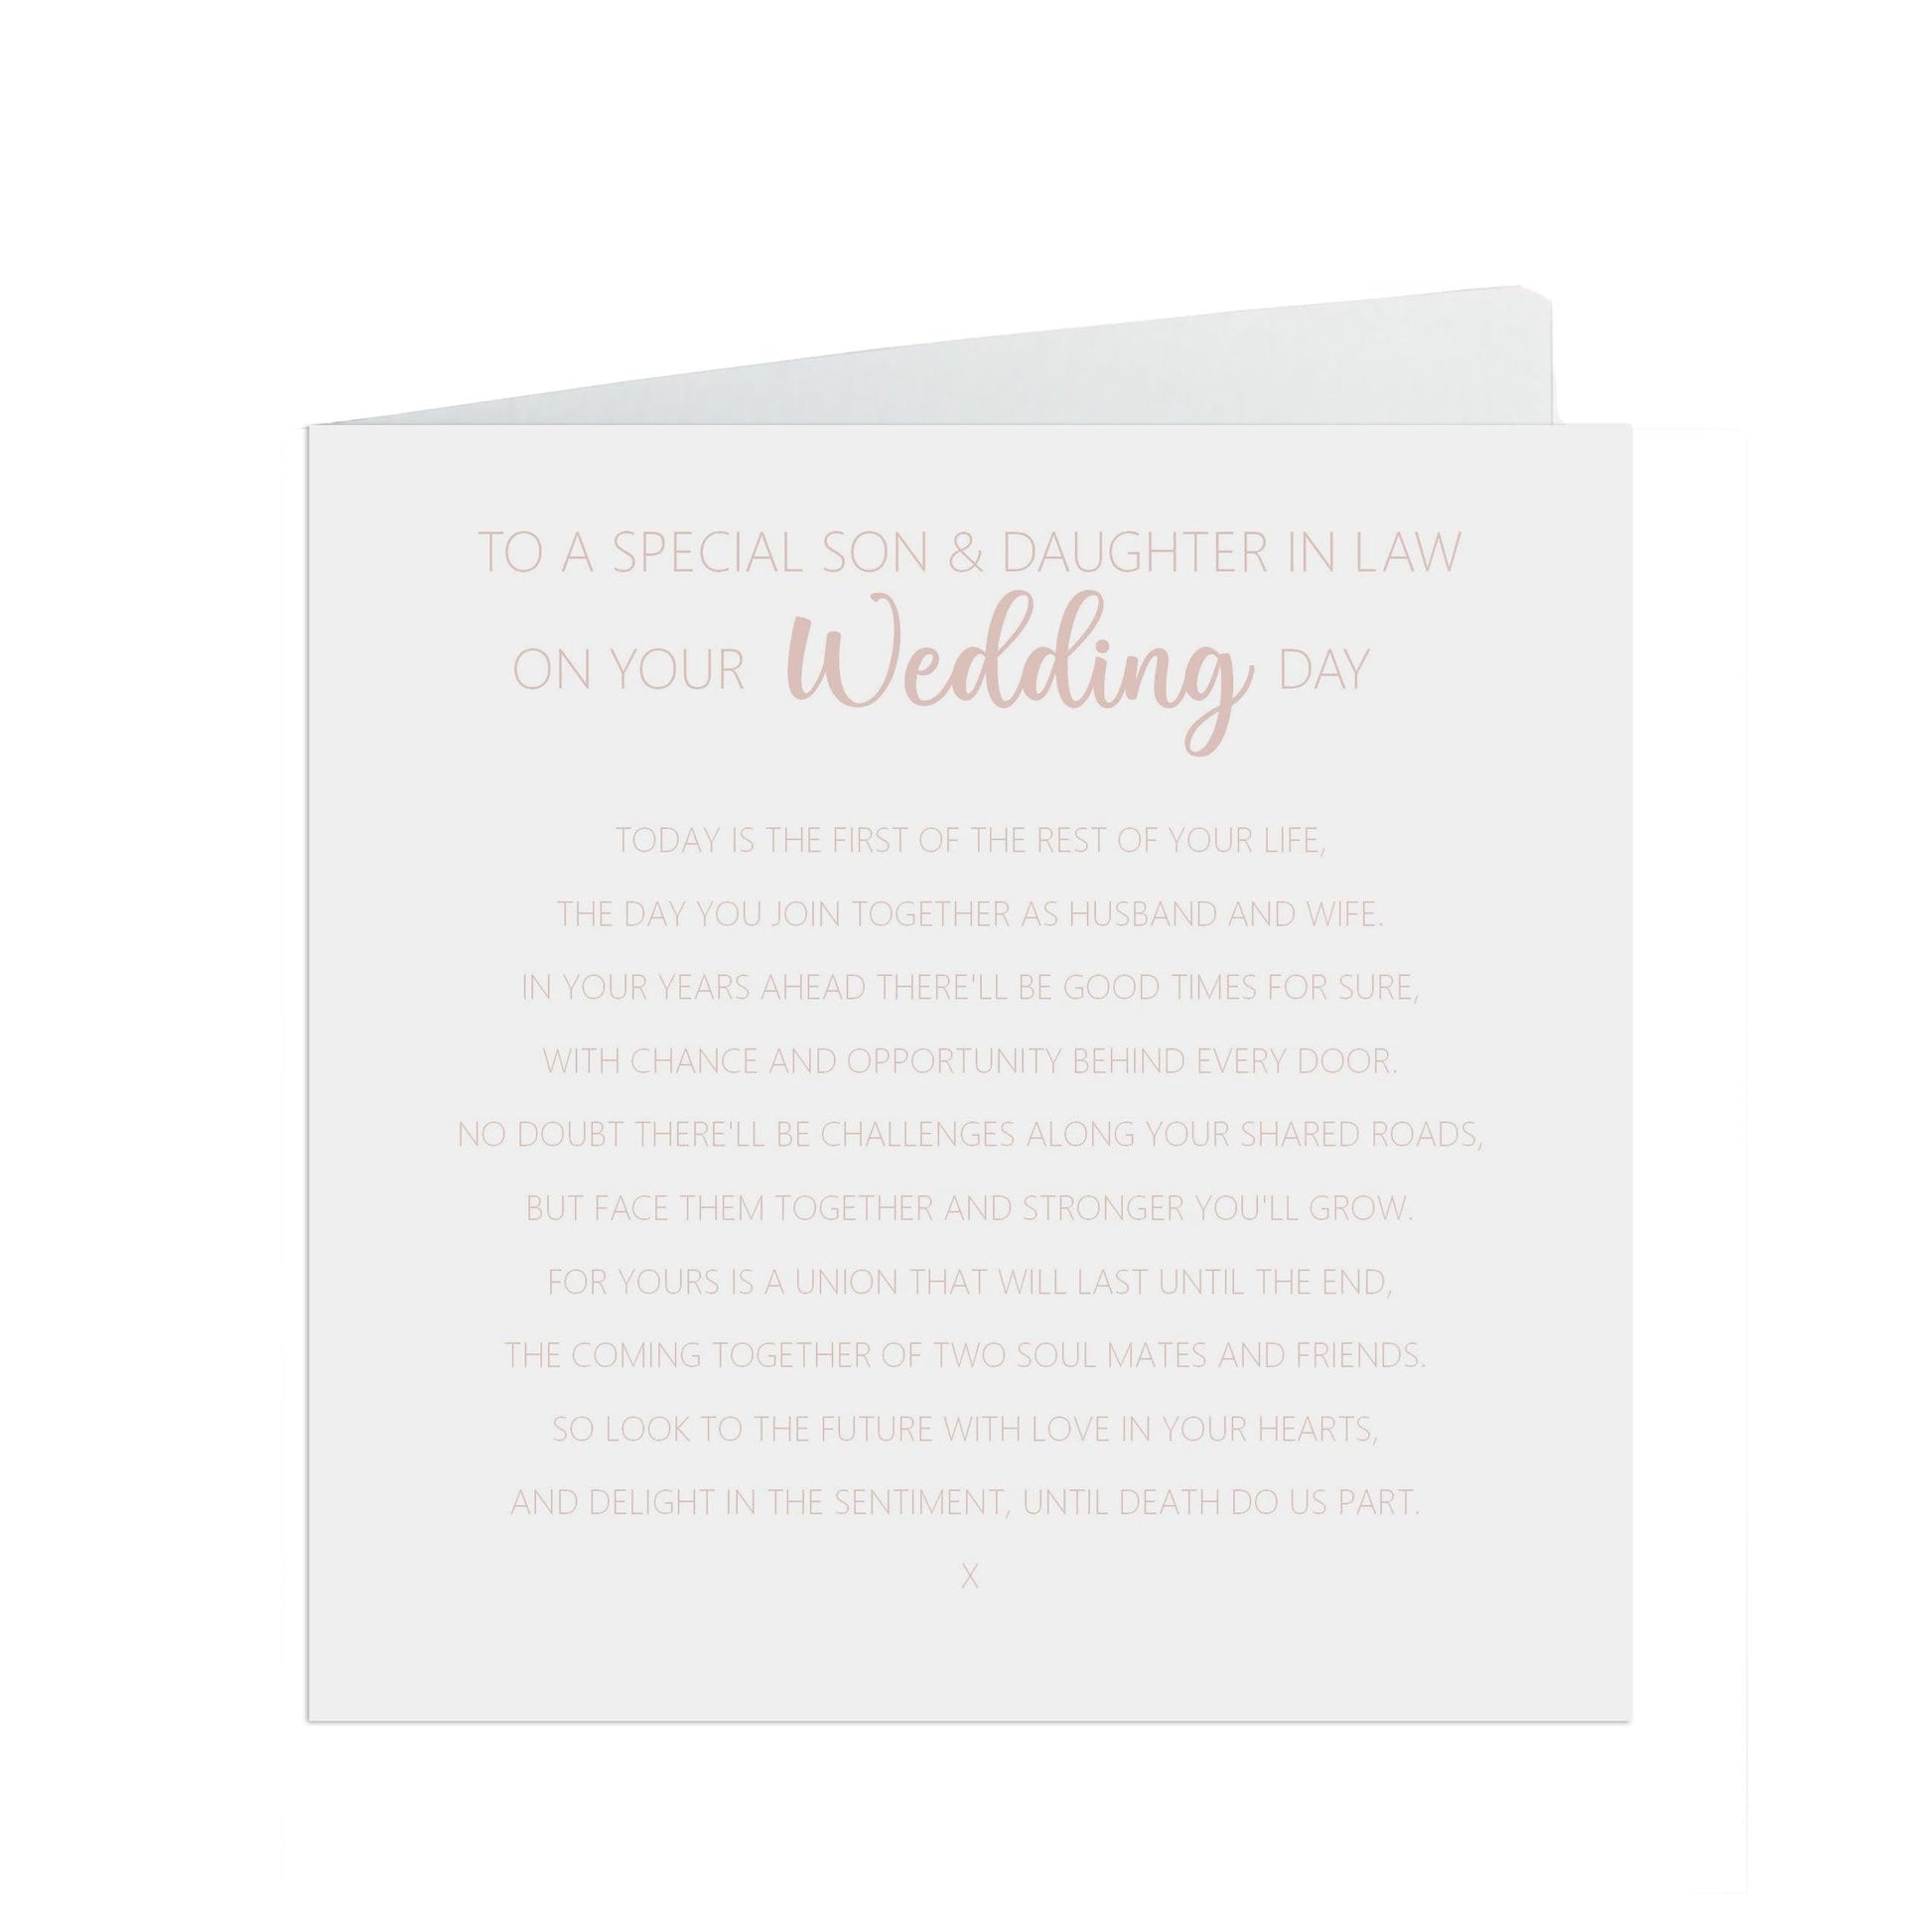  Son & Daughter In Law On Your Wedding Day Card, Rose Gold Effect 6x6 Inches In Size With A White Envelope by PMPRINTED 